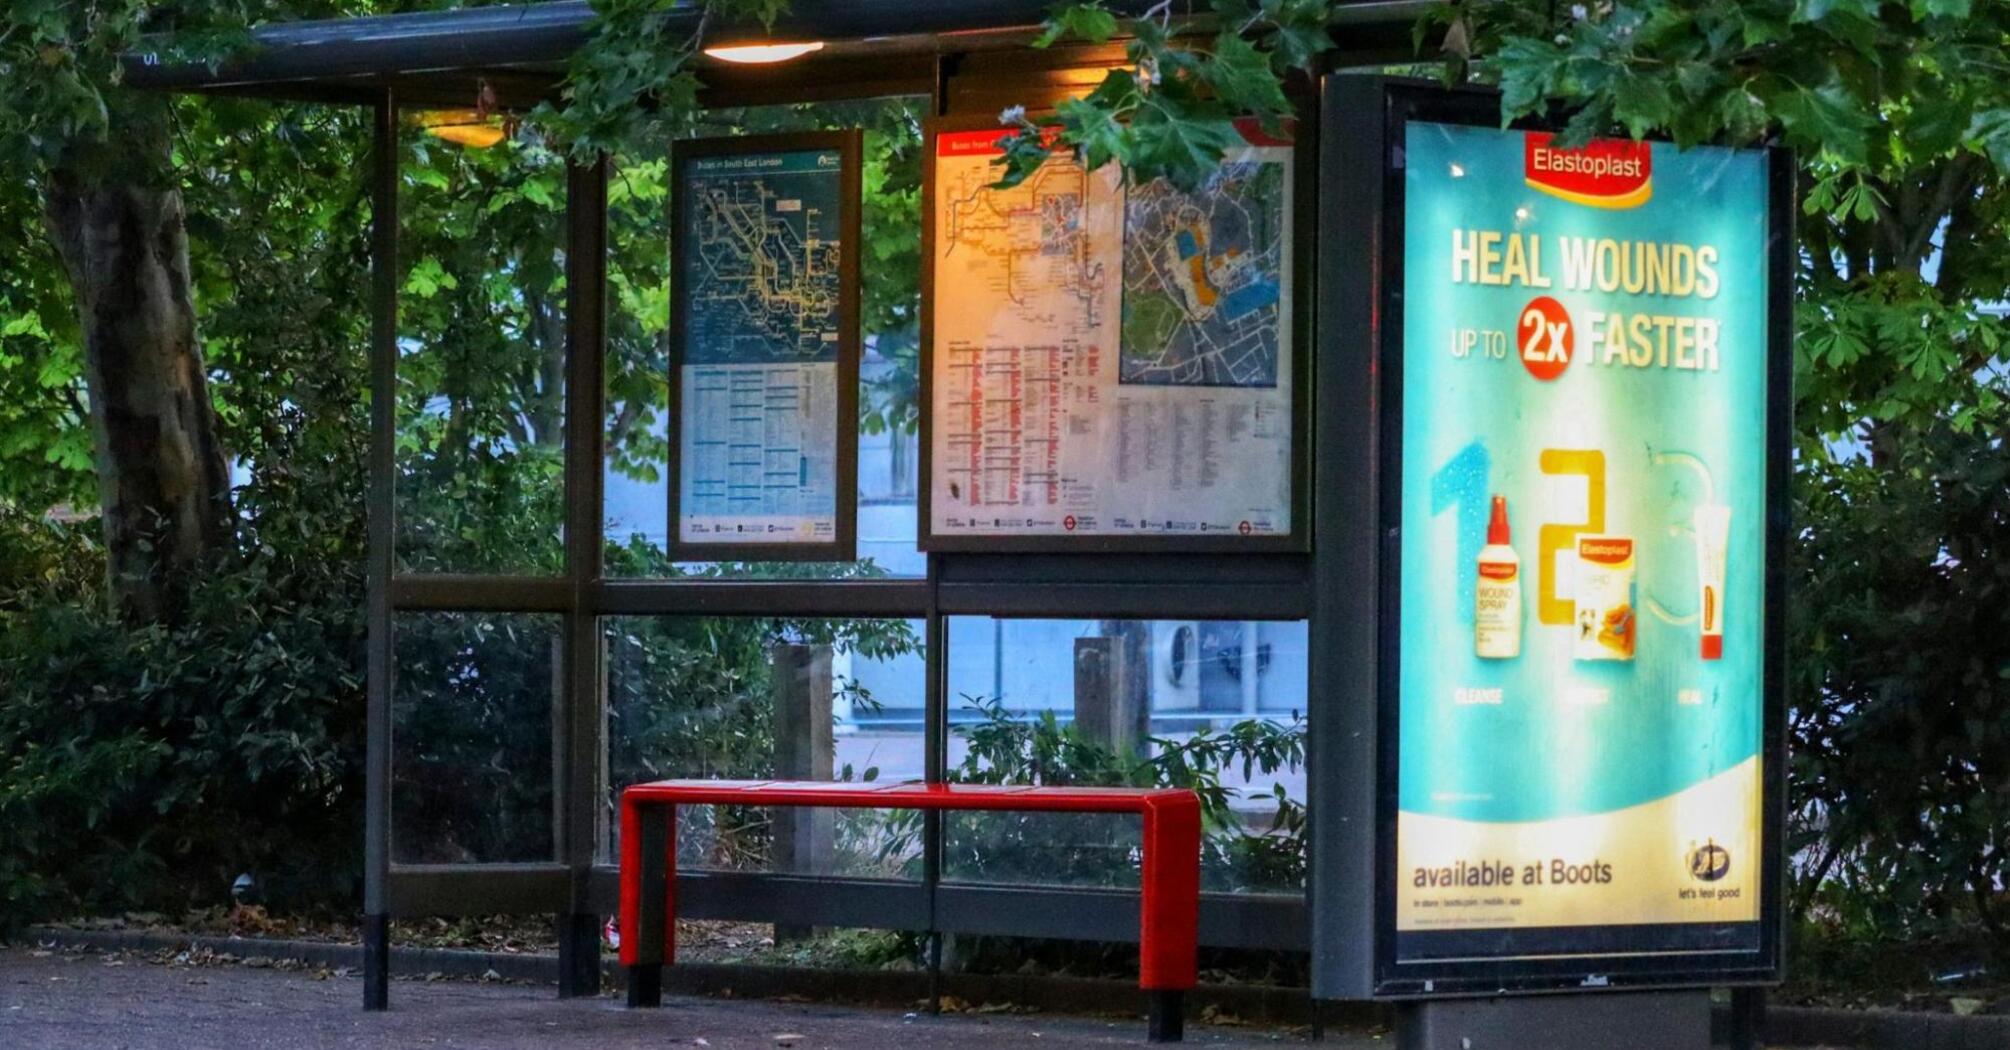 A well-lit bus stop with route maps and an advertisement poster, surrounded by green trees